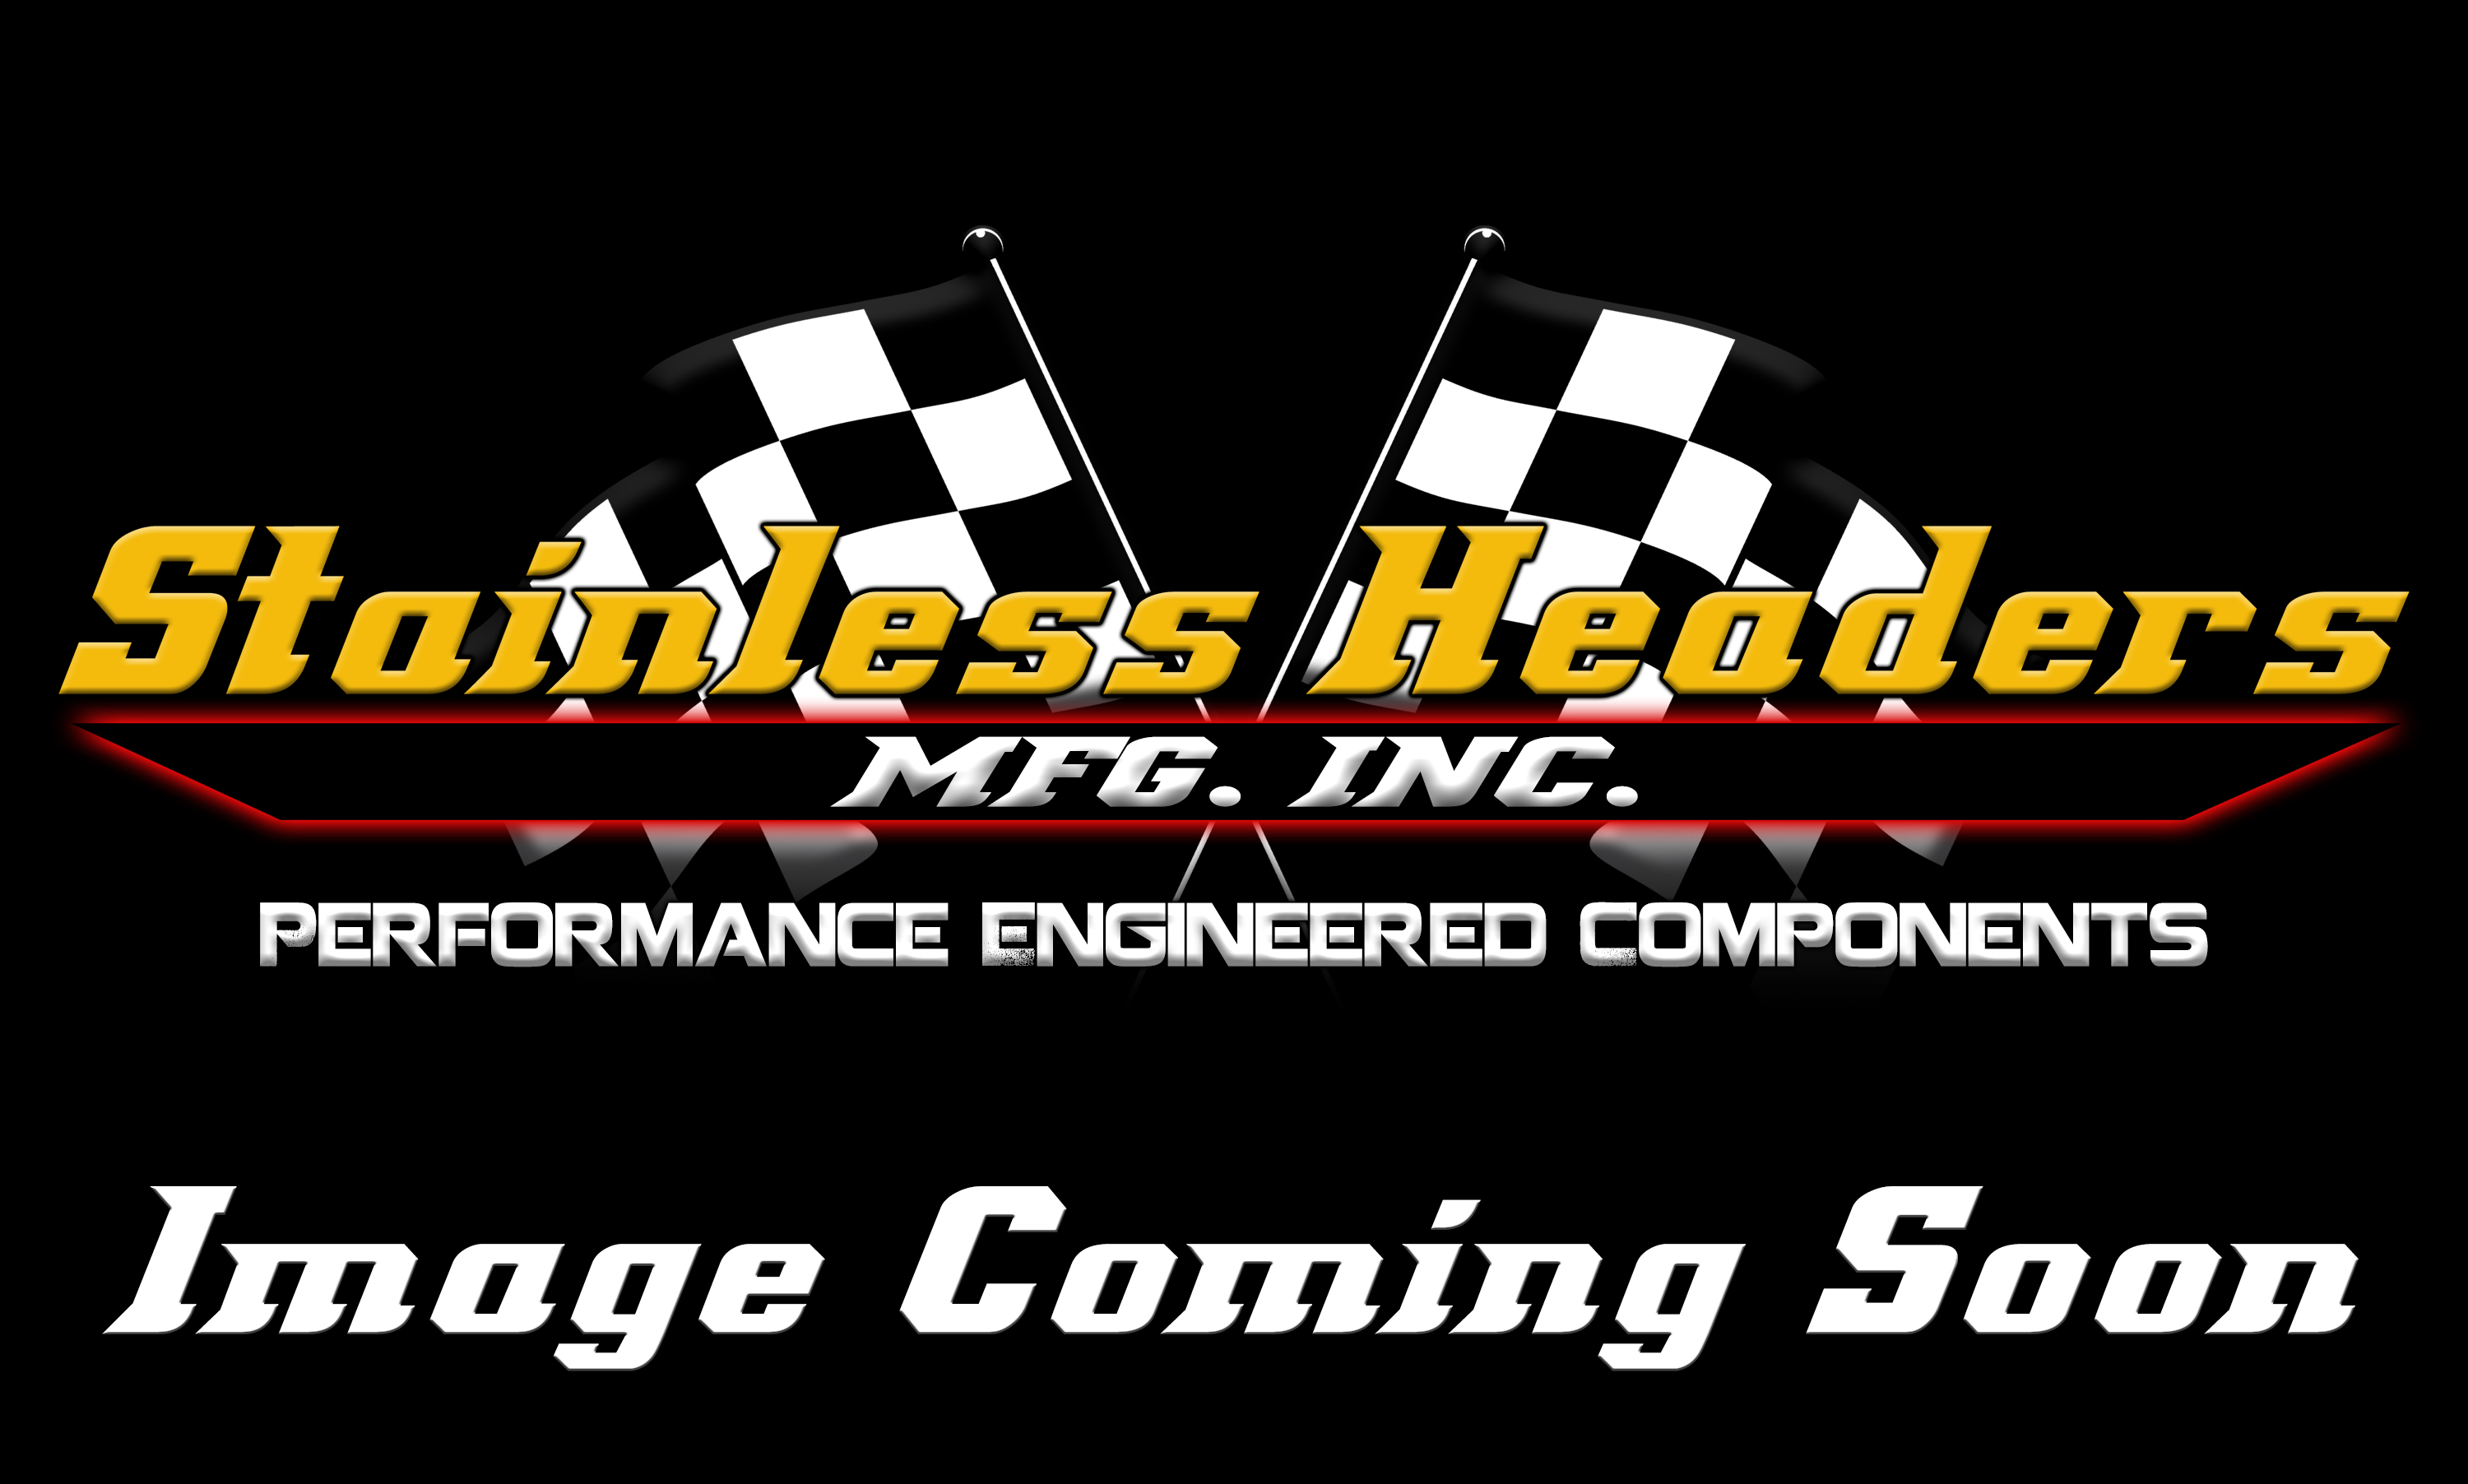 Stainless Headers - 2 1/2" Primary 8 into 1 Performance Merge Collector-18ga 321ss - Image 3